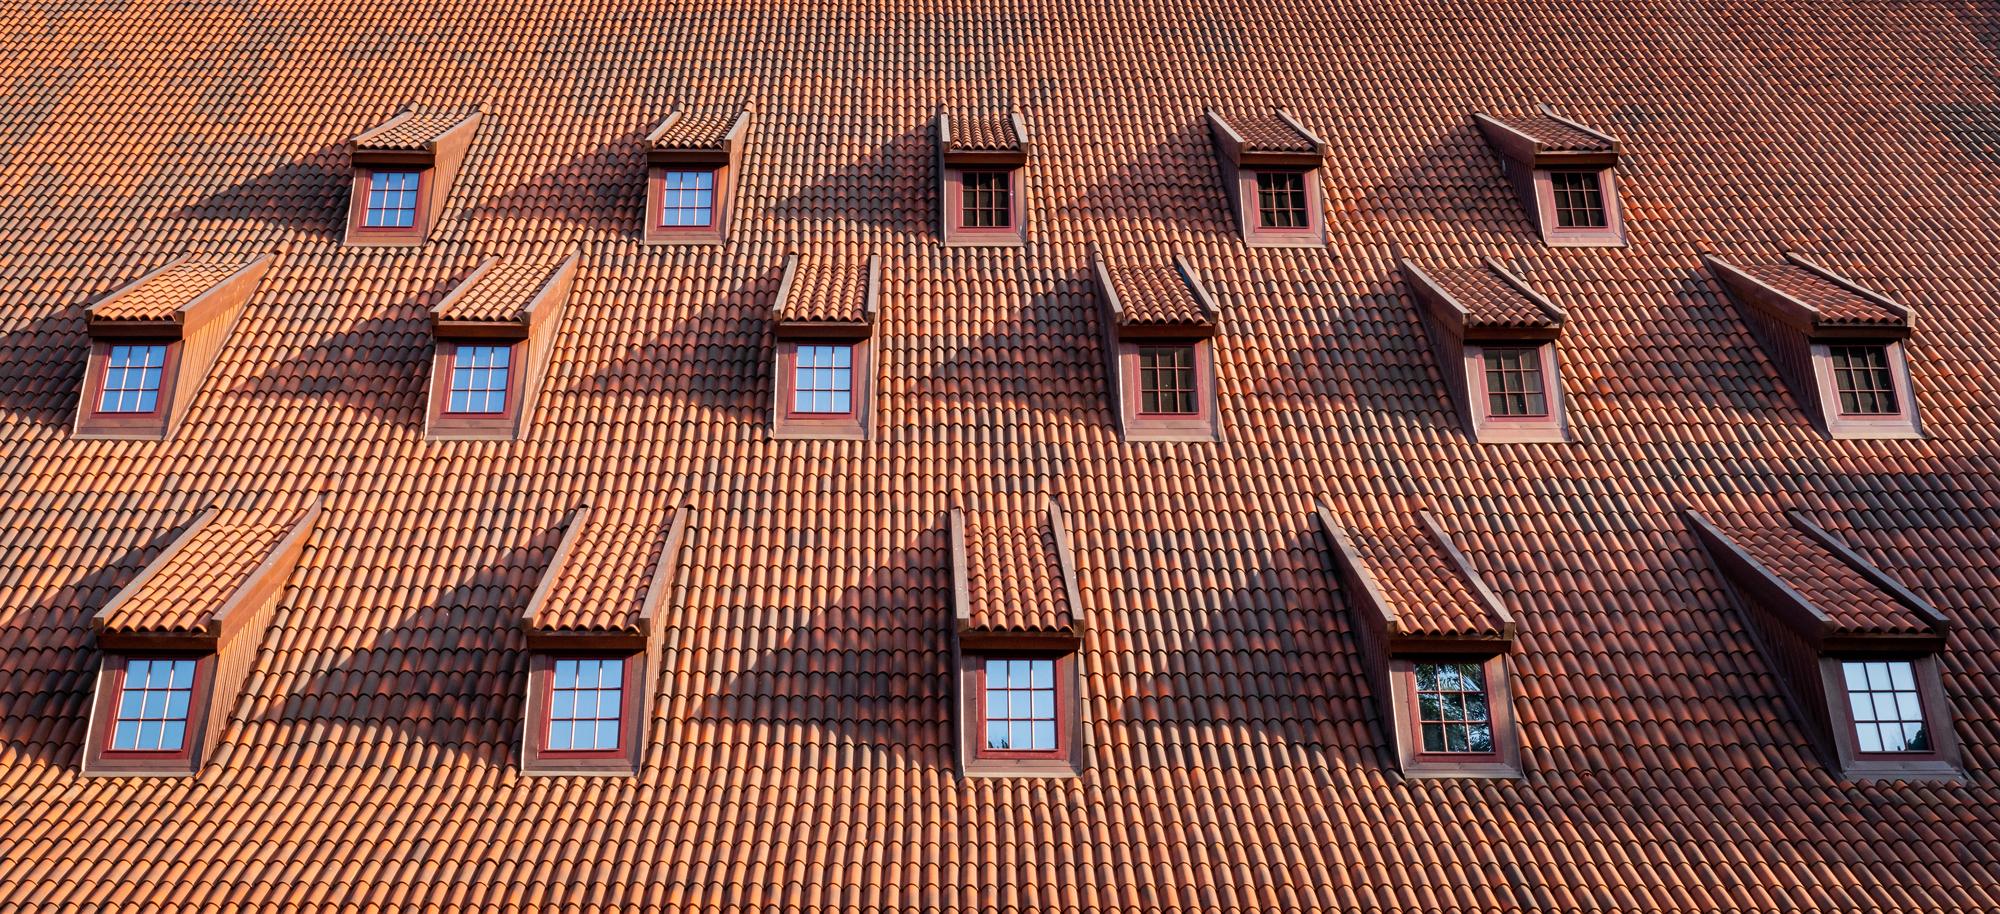 Traditional roof with windows covered by ceramic tiles